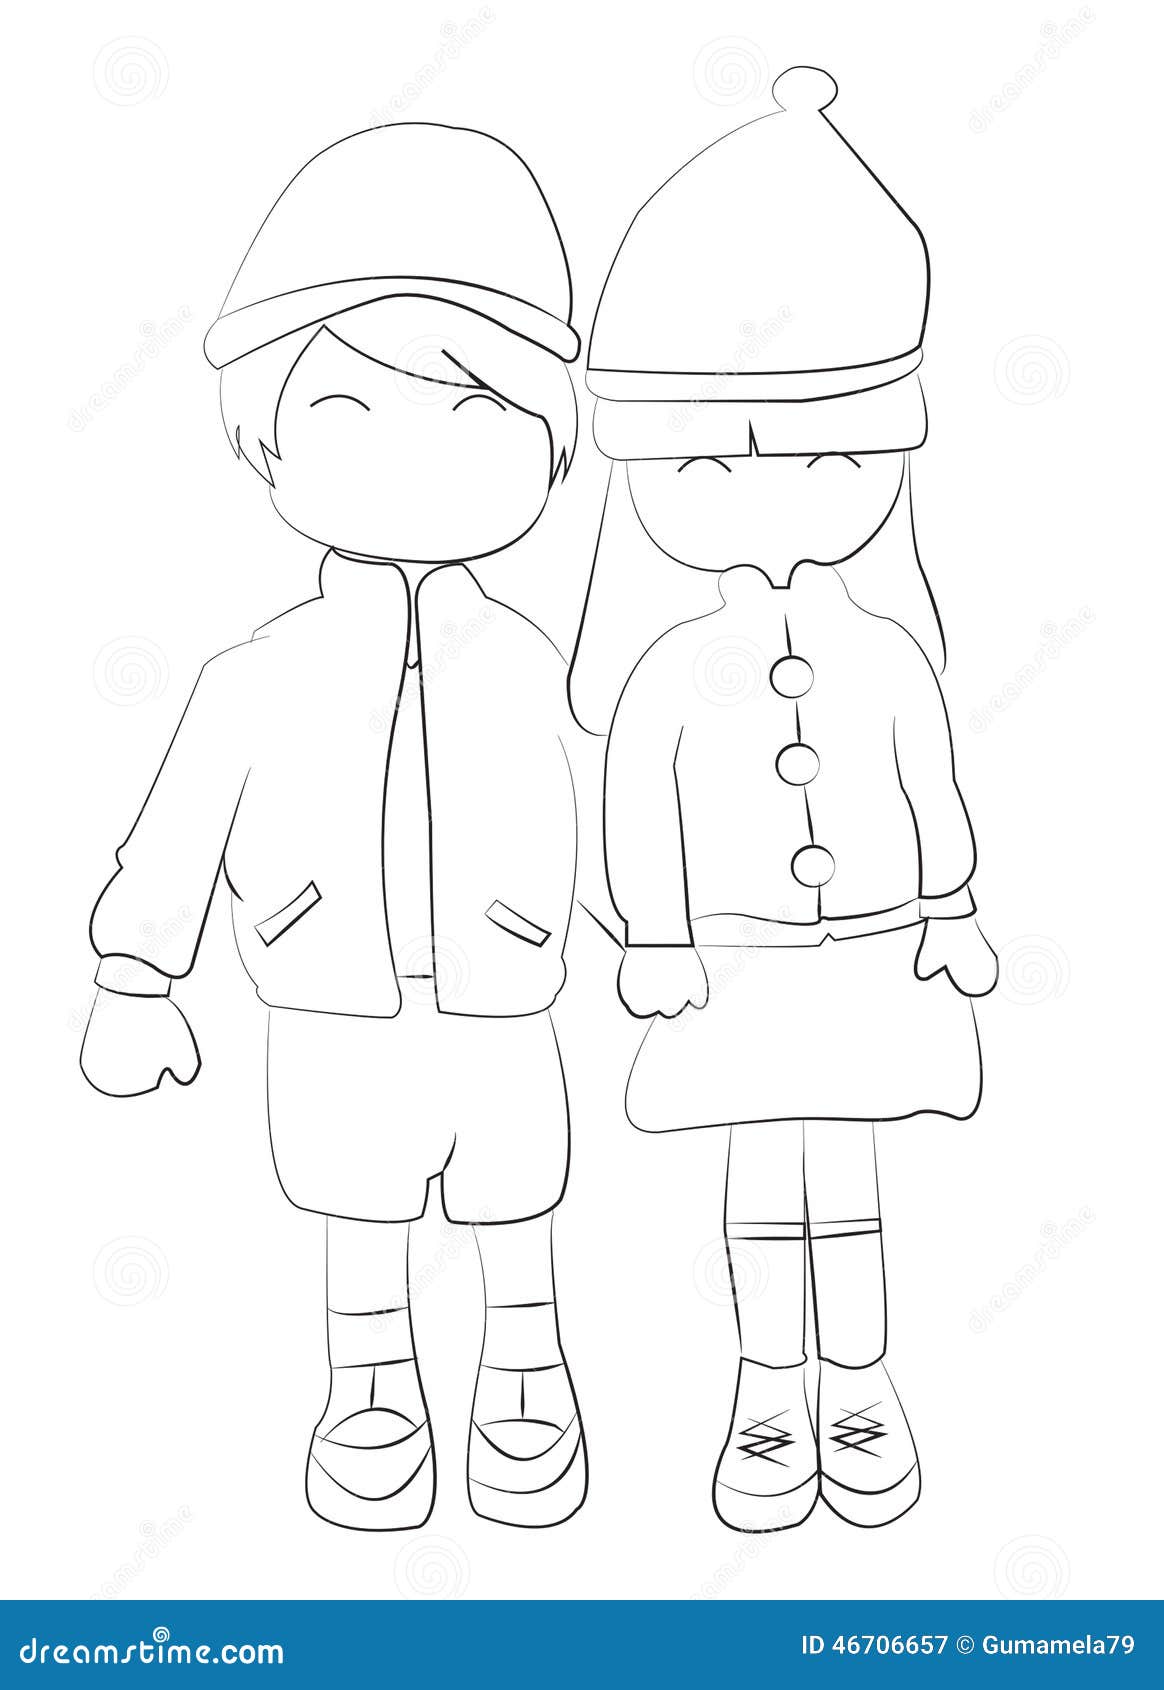 Hand Drawn Coloring Page Of A Boy And Girl Holding Hands Stock Illustration Illustration Of Black Boyfriends